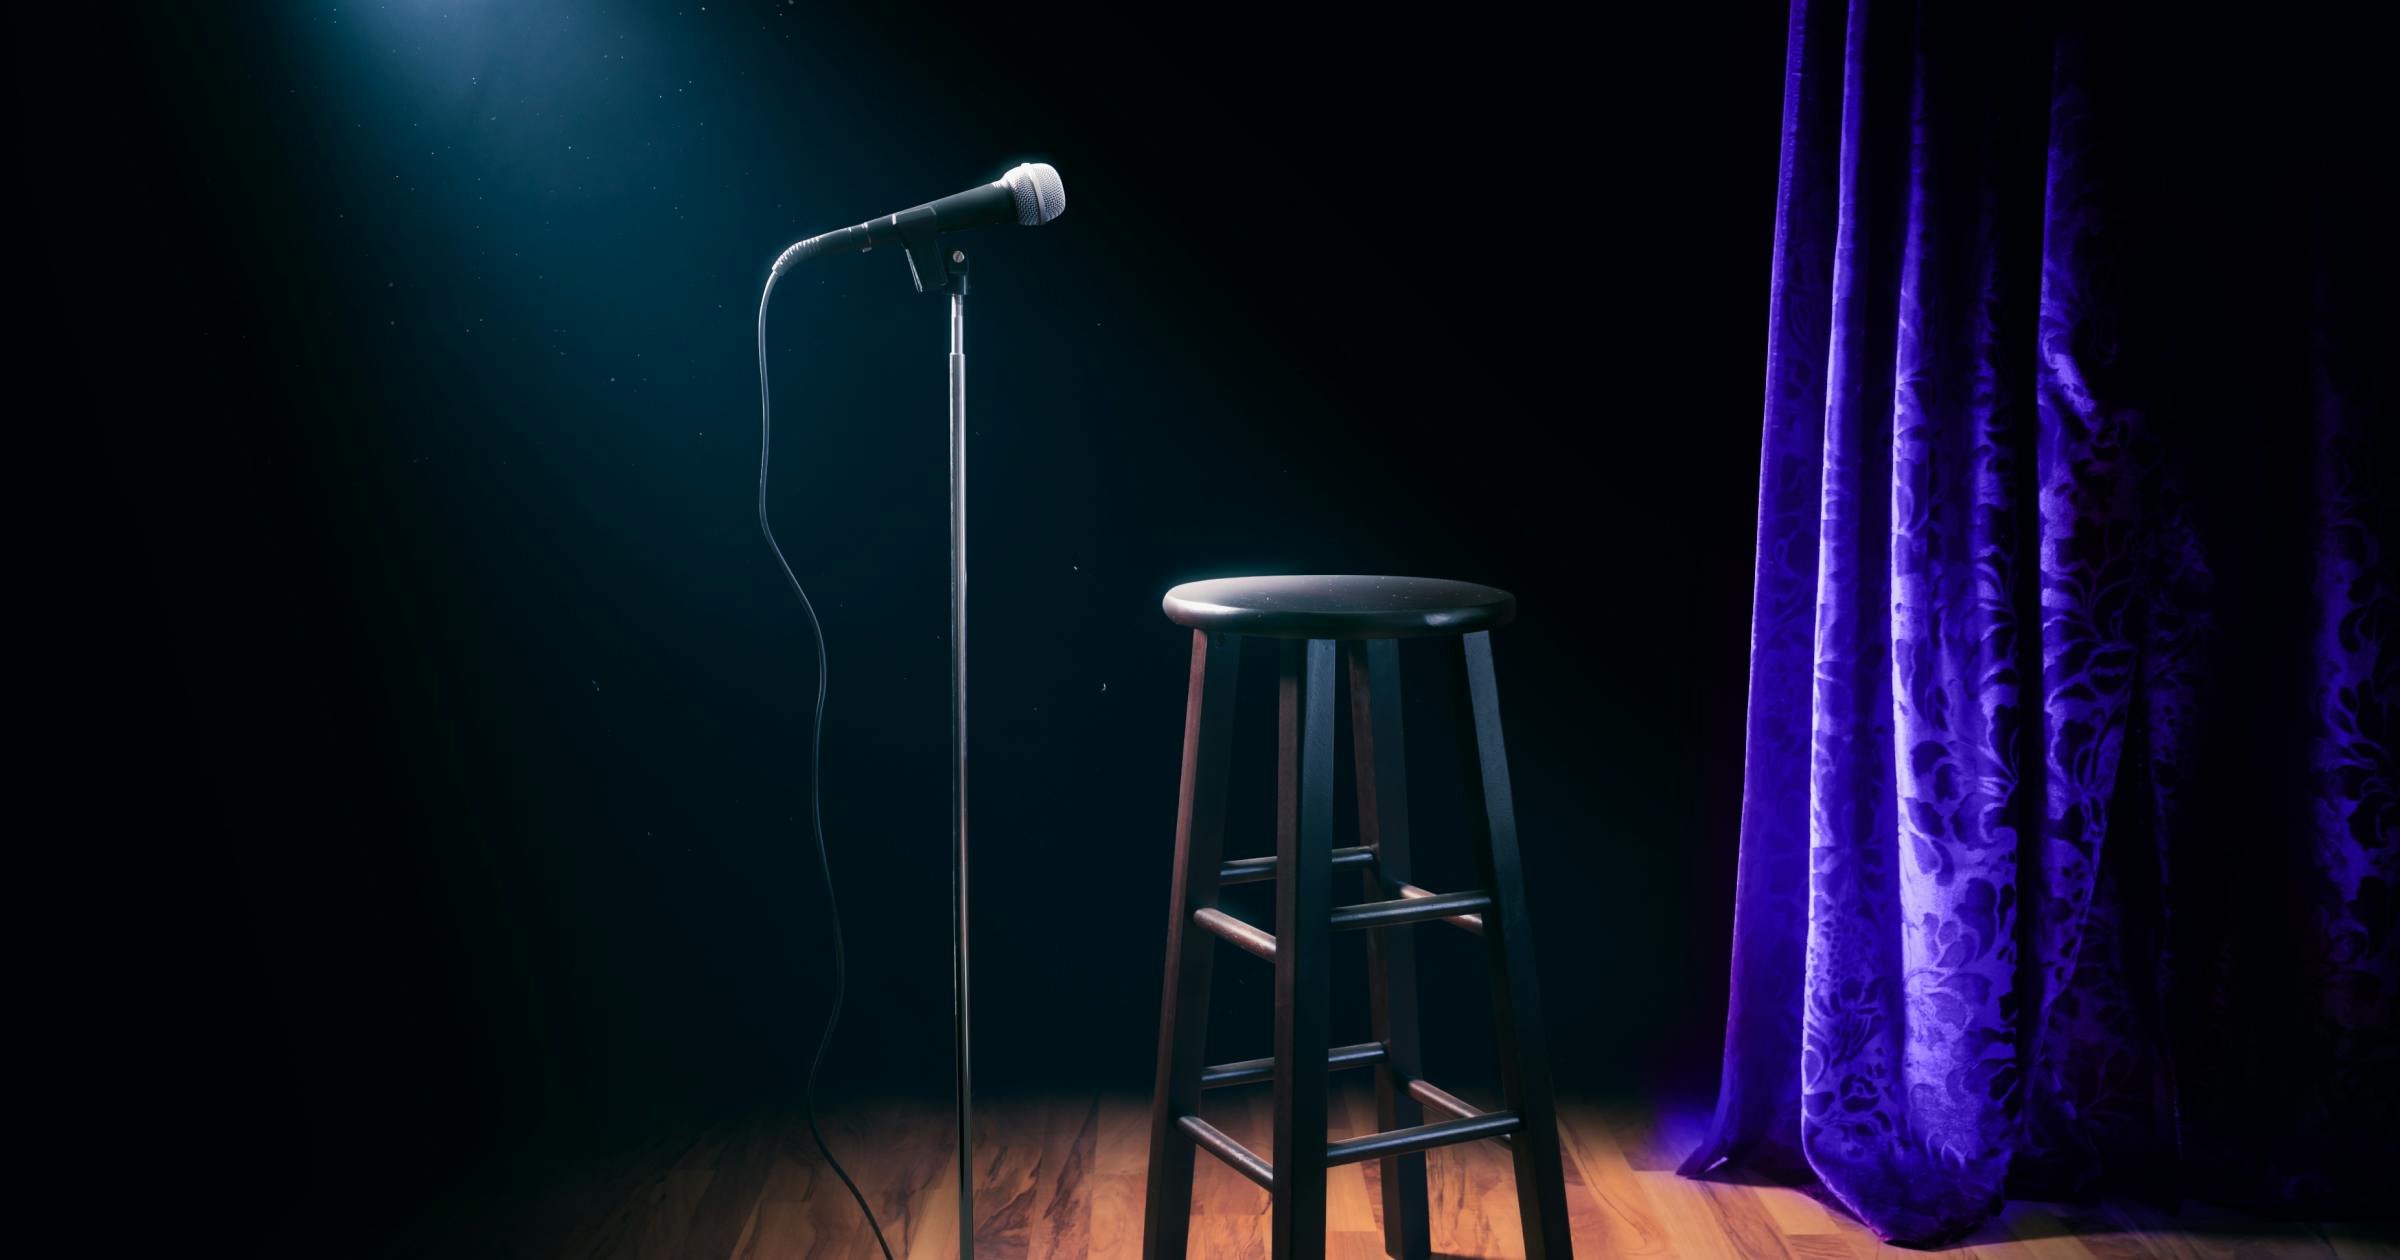 Mic, stool and curtain for a comedy set